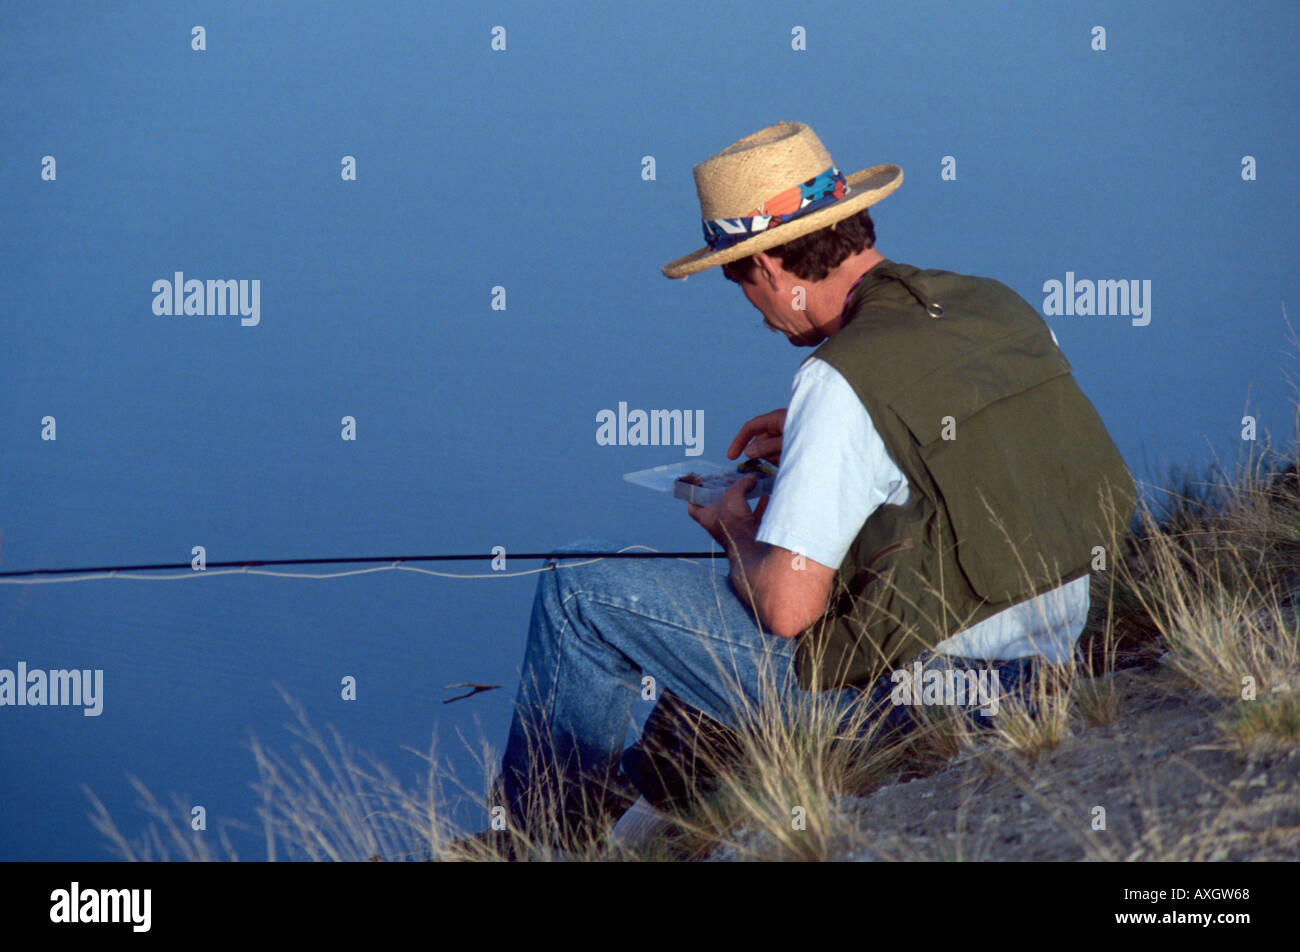 https://c8.alamy.com/comp/AXGW68/fly-fisherman-wearing-straw-hat-and-fishing-vest-selecting-fly-from-AXGW68.jpg